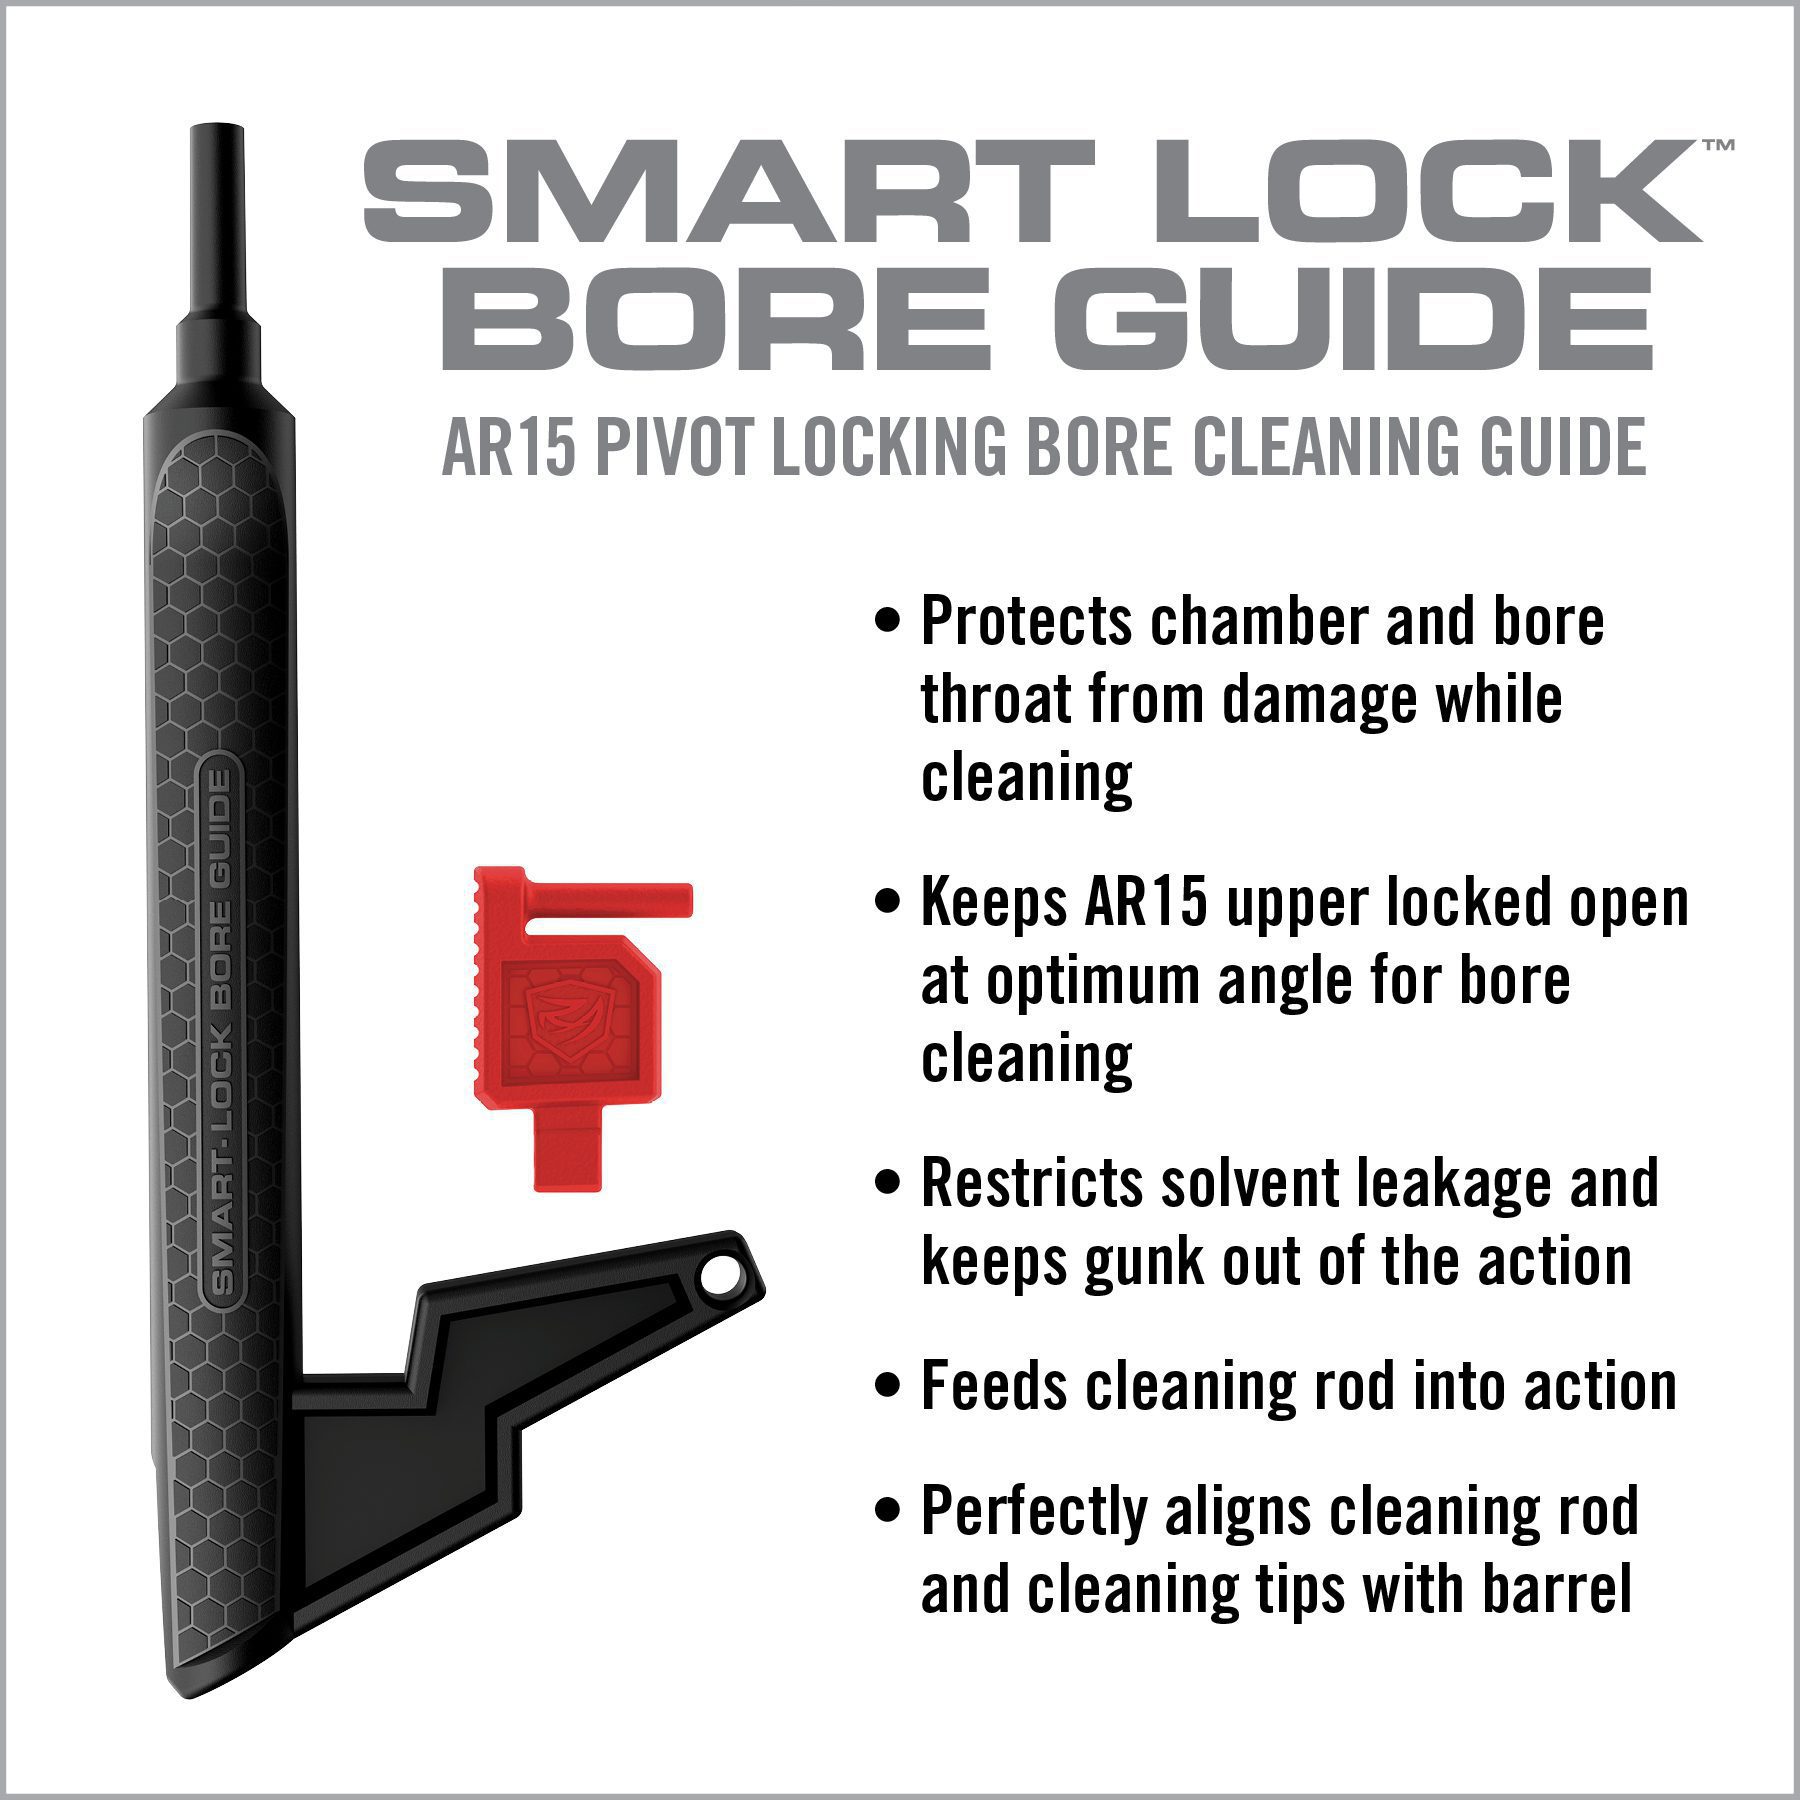 the smart lock bore guide is shown with instructions